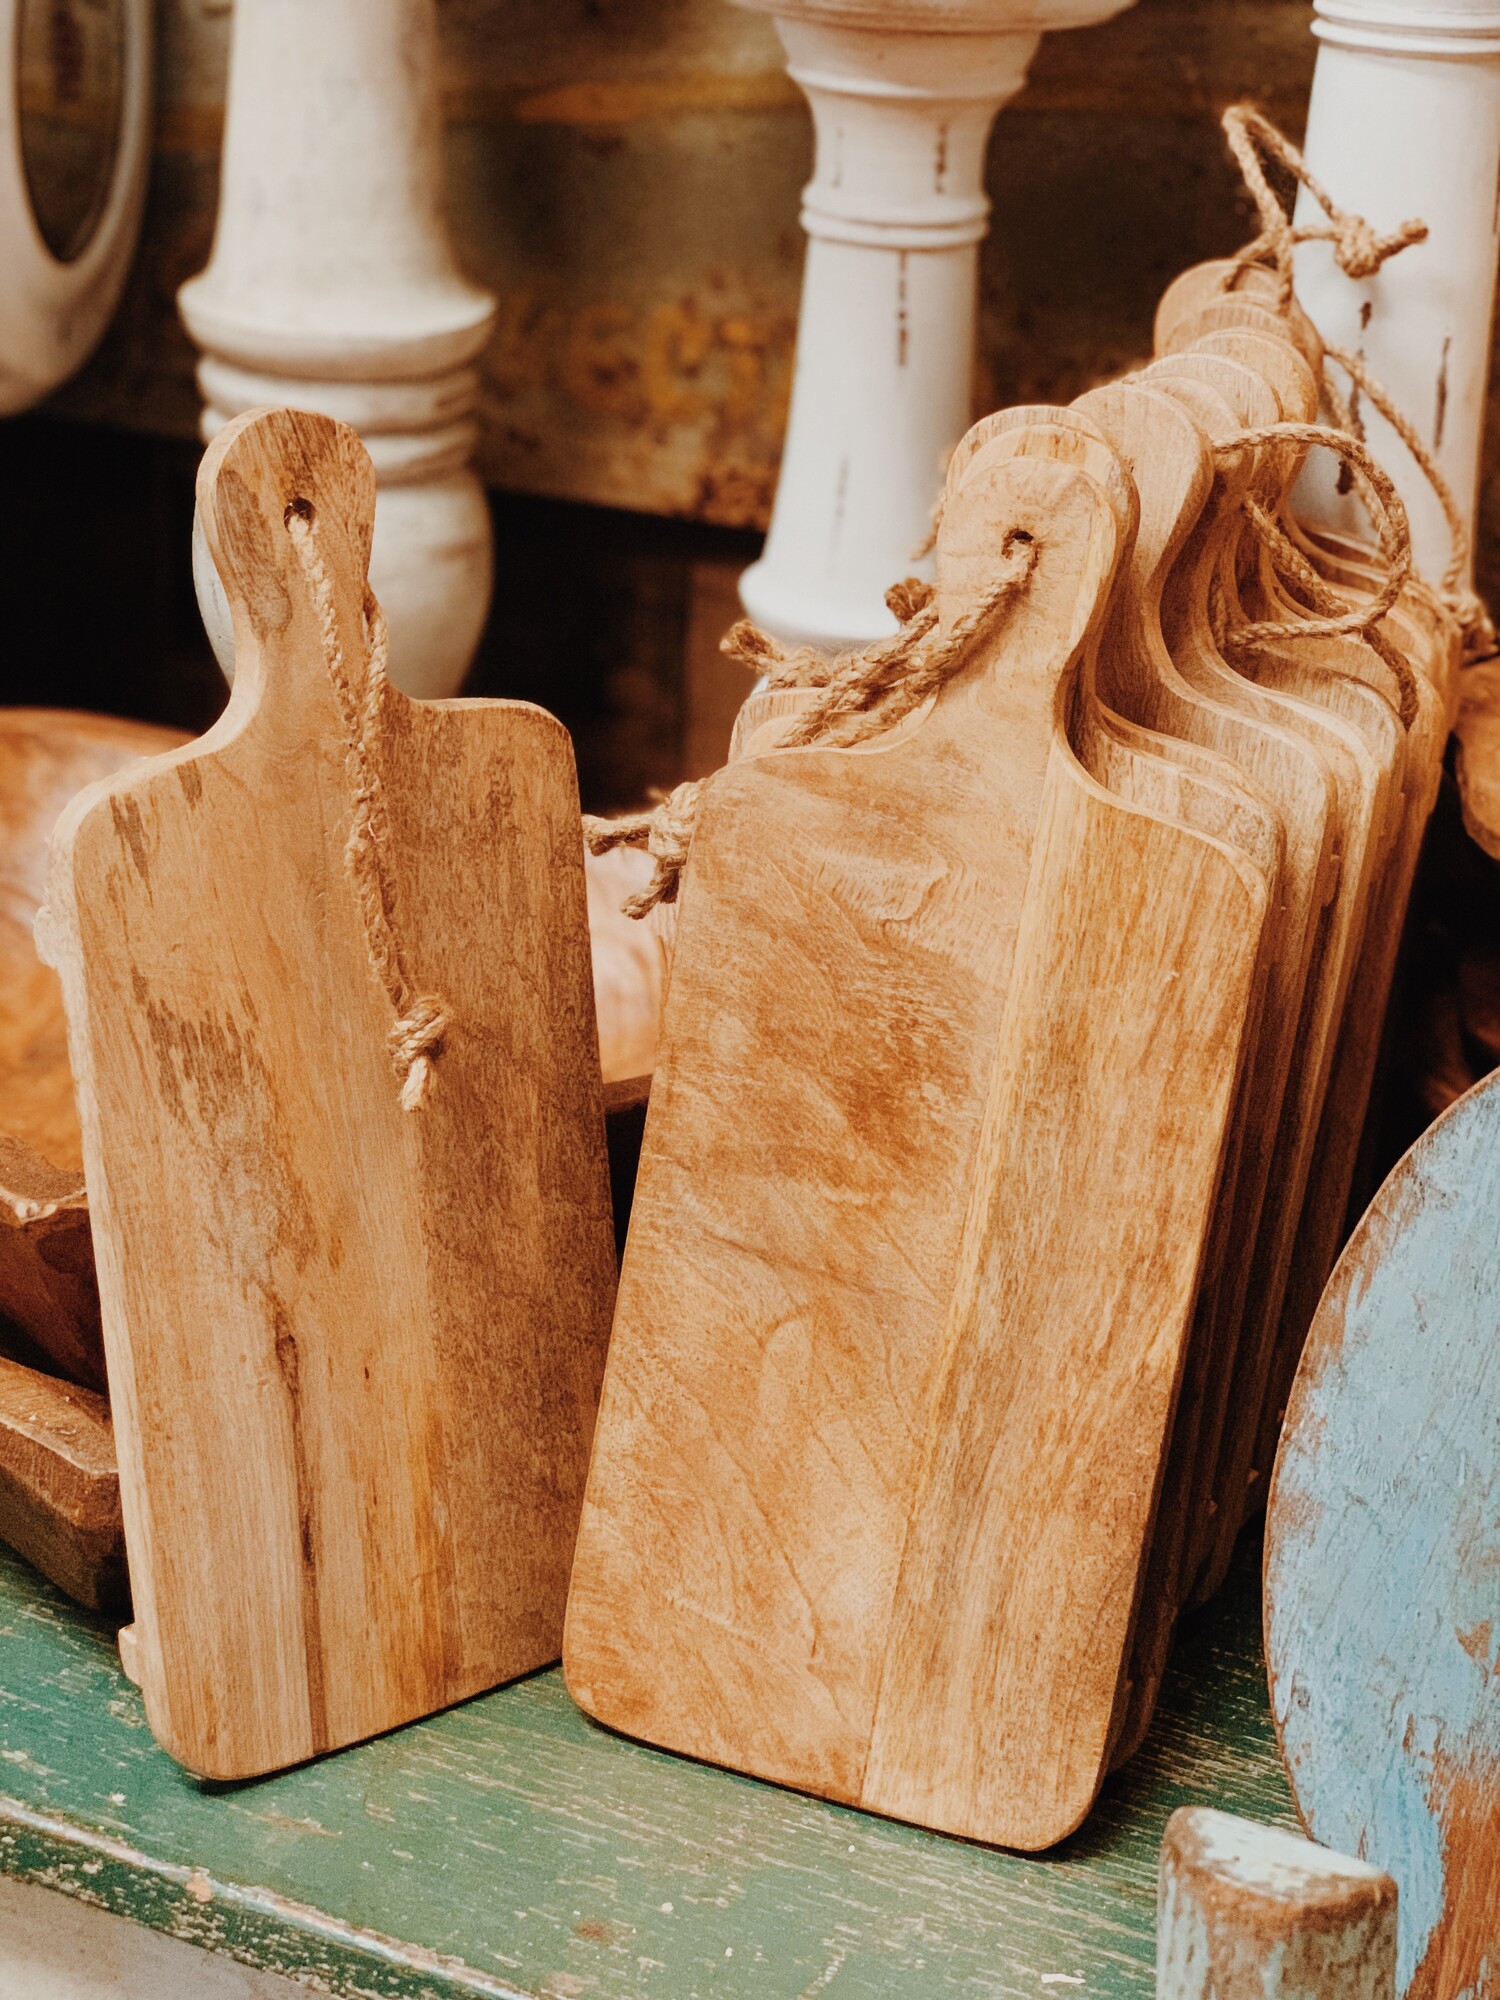 These light wash, wood cutting boards have two legs that raise it off of the surface. It measures 14 inches long by 6 inches wide.